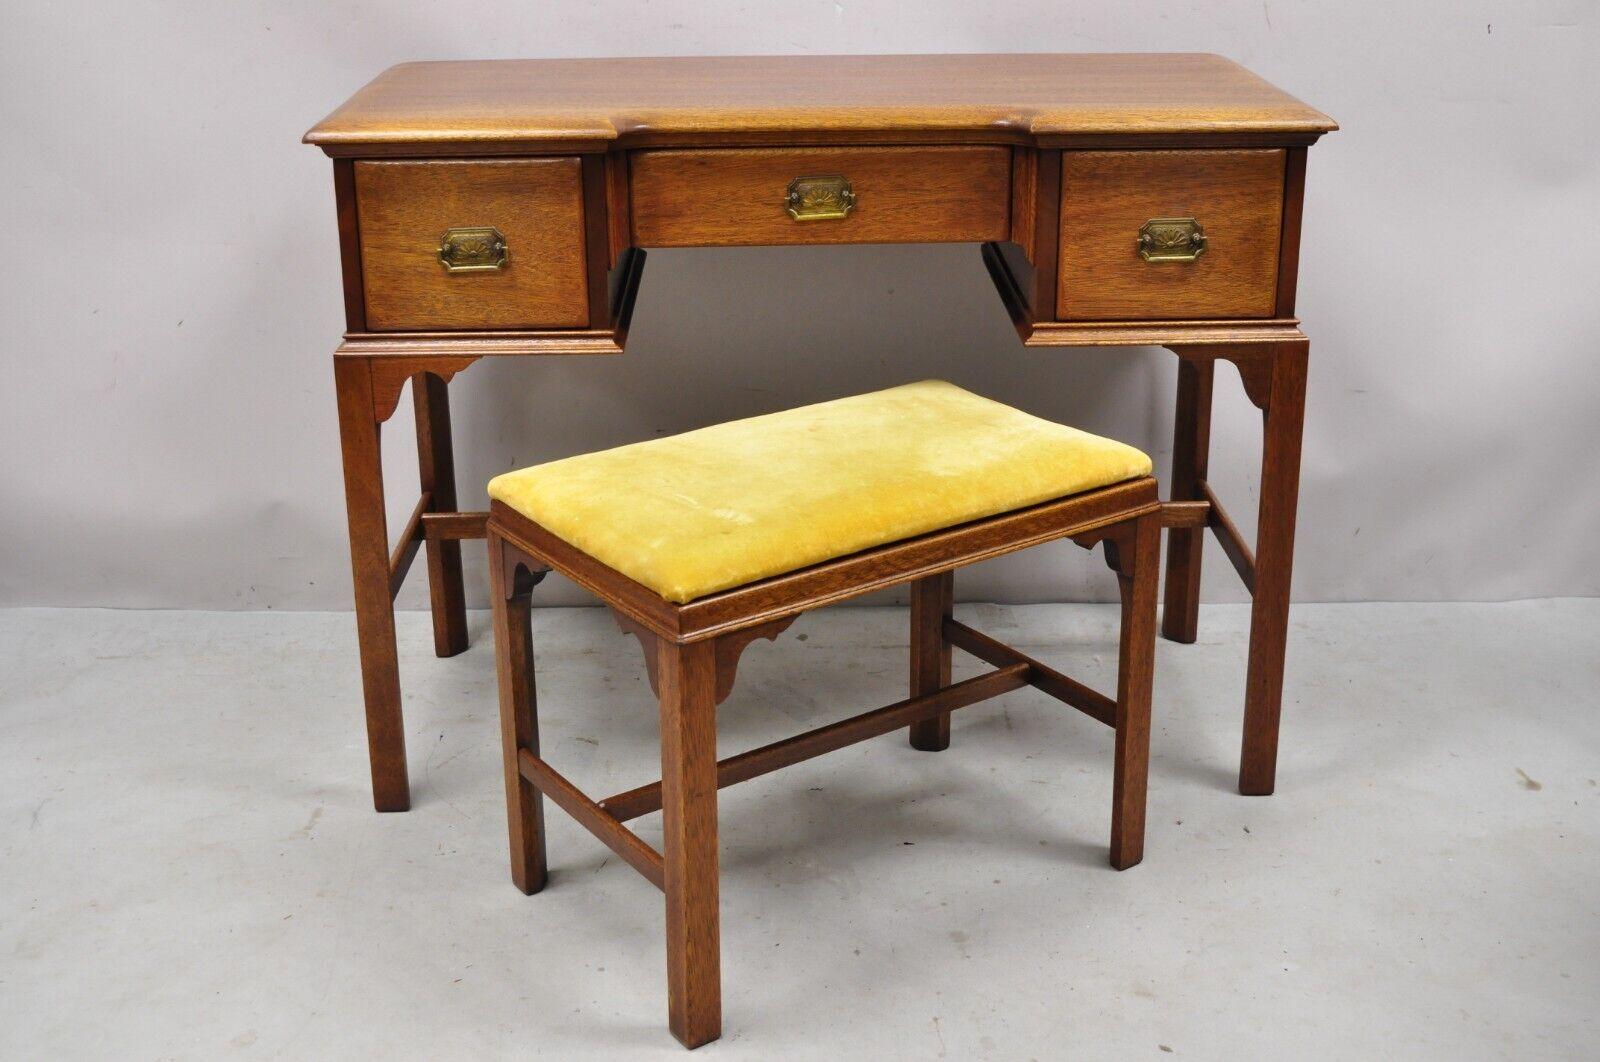 Vintage Georgian Style solid Mahogany Vanity table desk with Vanity Bench - 2 Pc Set. Item features (1) Vanity table, (1) vanity bench, solid wood construction, beautiful wood grain, 3 dovetailed drawers, solid brass hardware, quality American